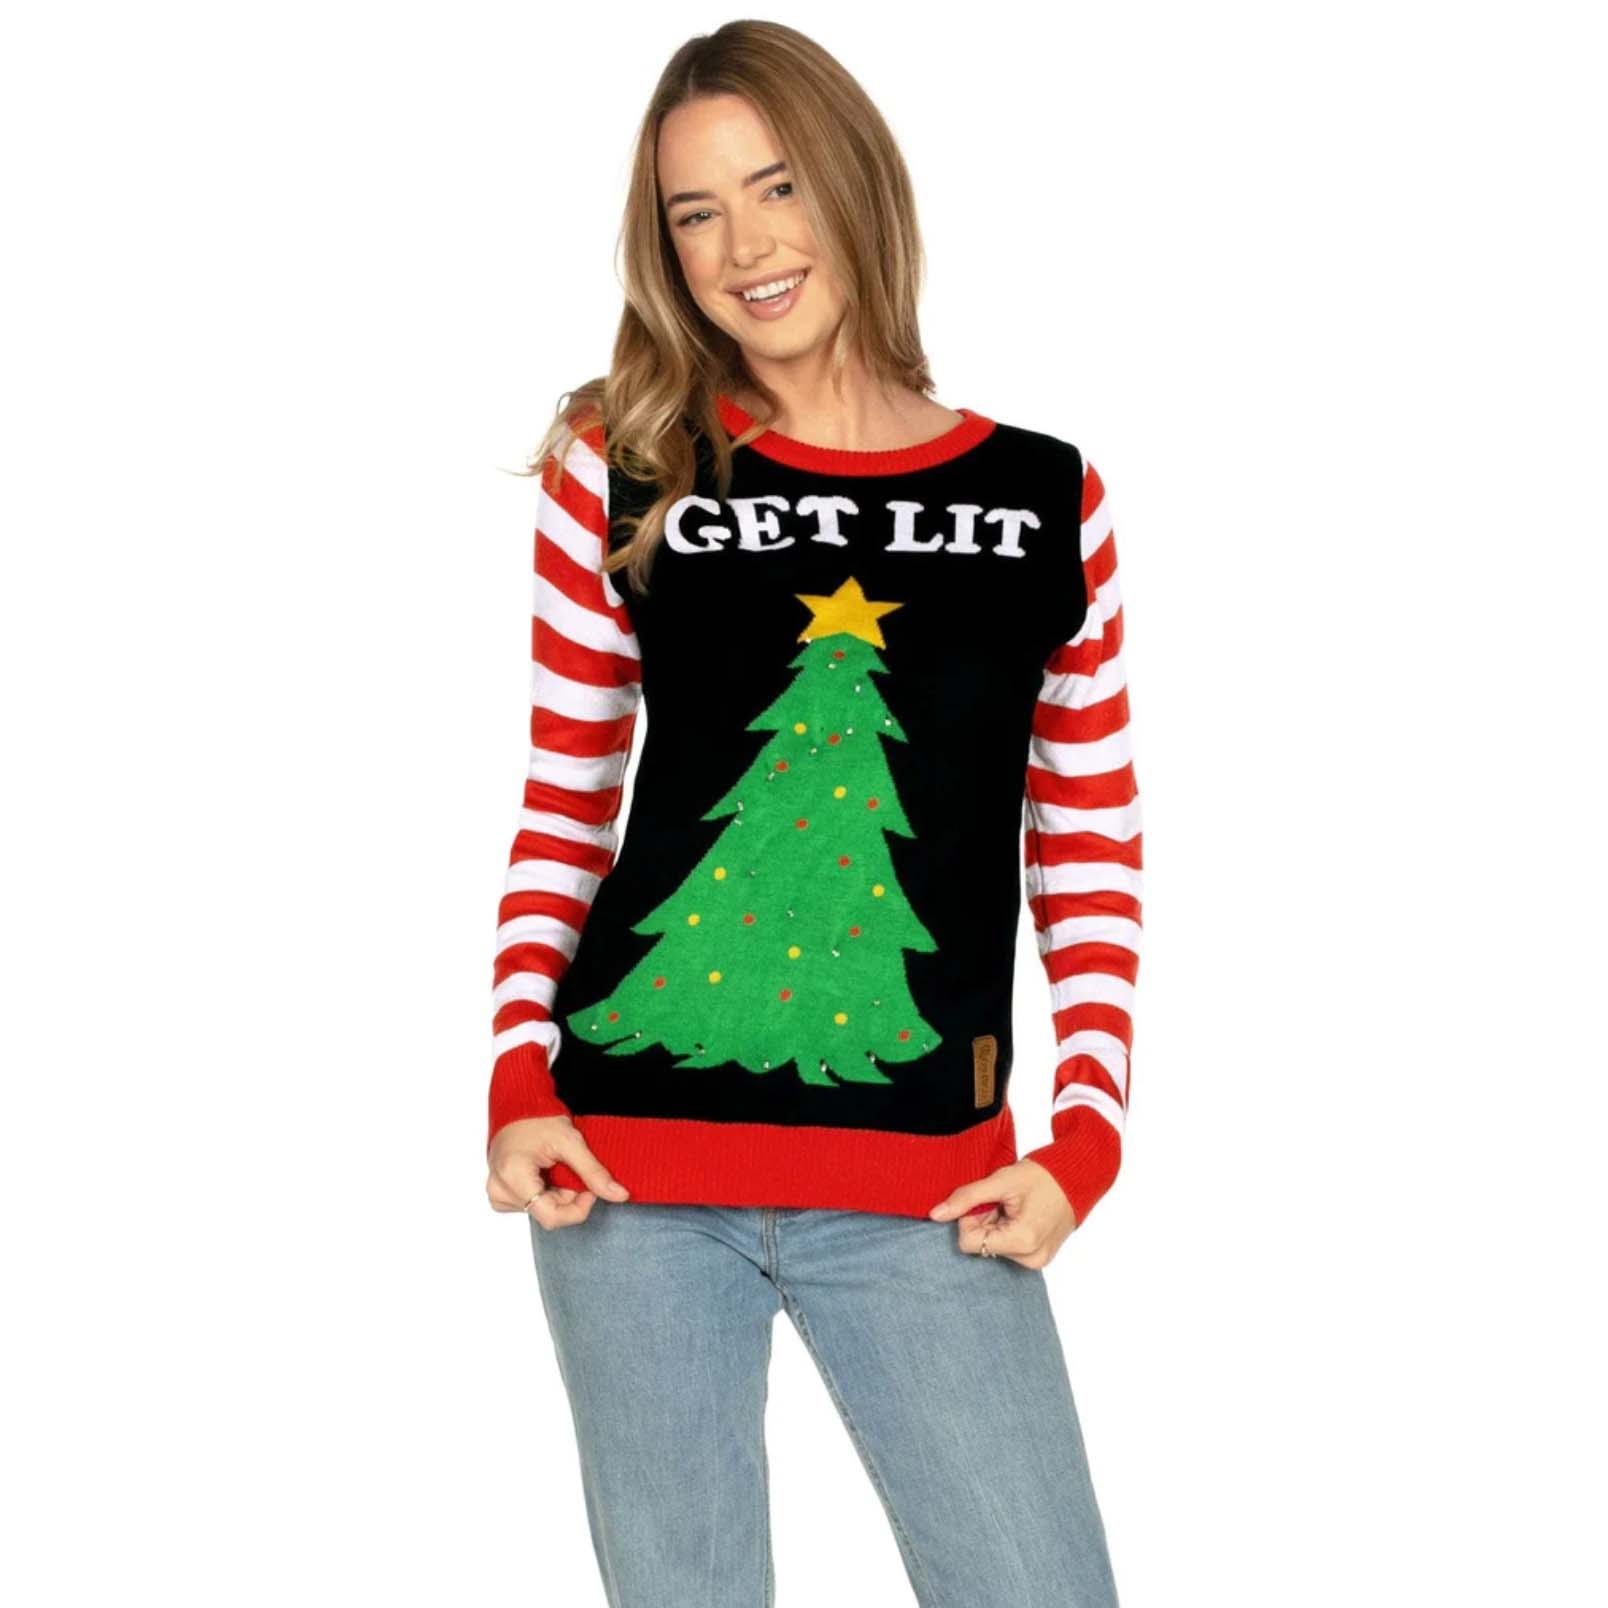 Woman wearing sweater with light up Christmas tree